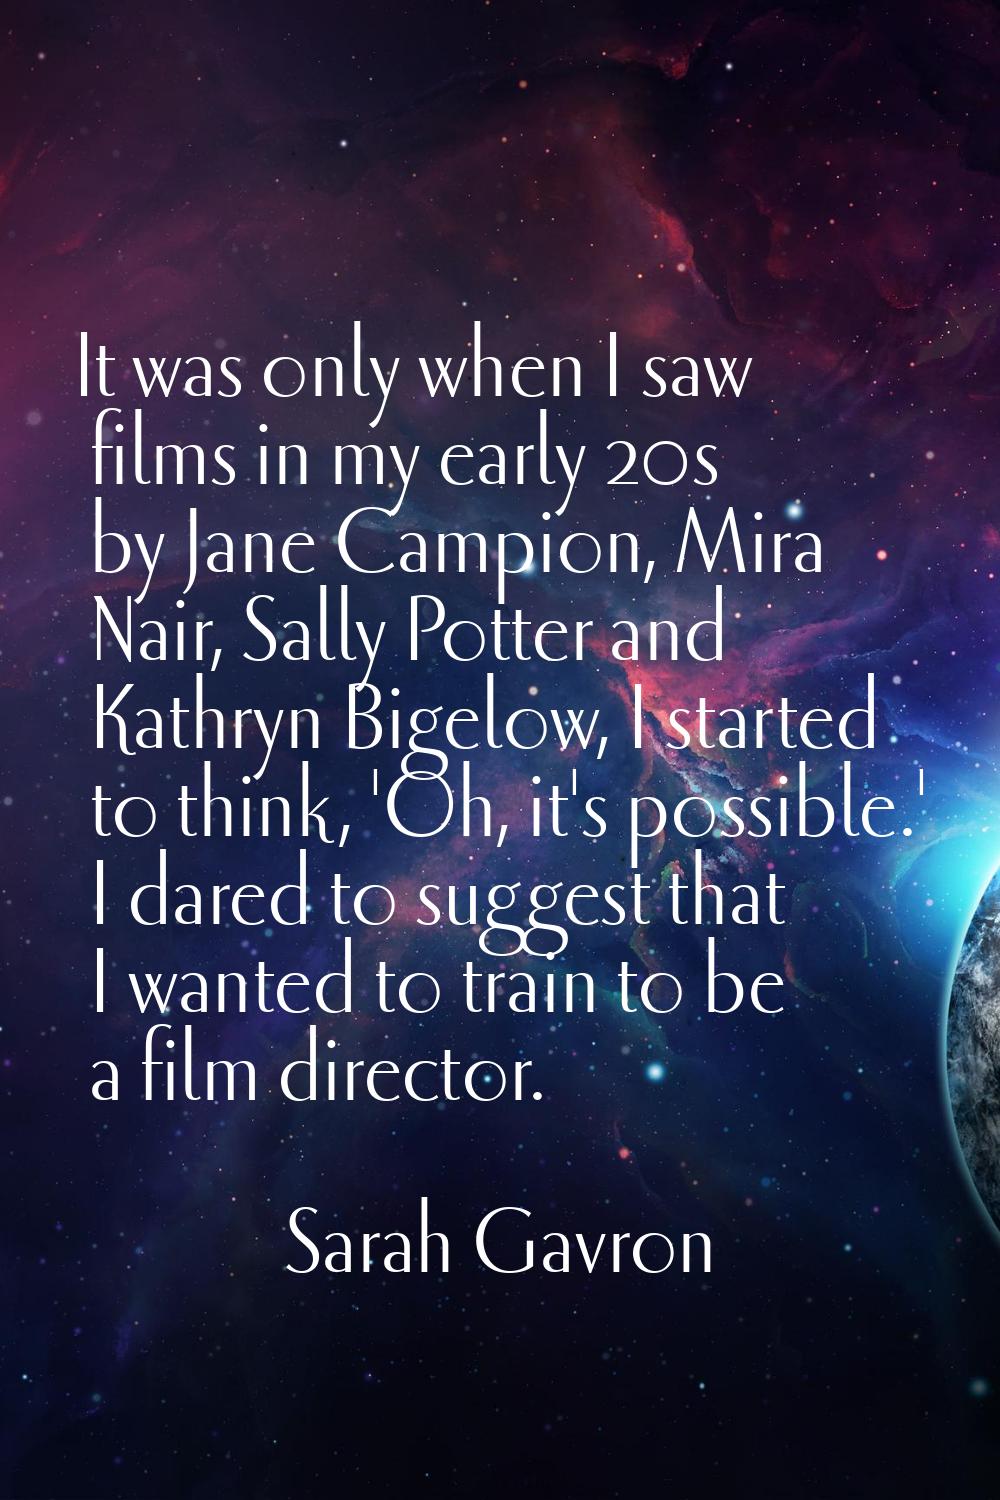 It was only when I saw films in my early 20s by Jane Campion, Mira Nair, Sally Potter and Kathryn B